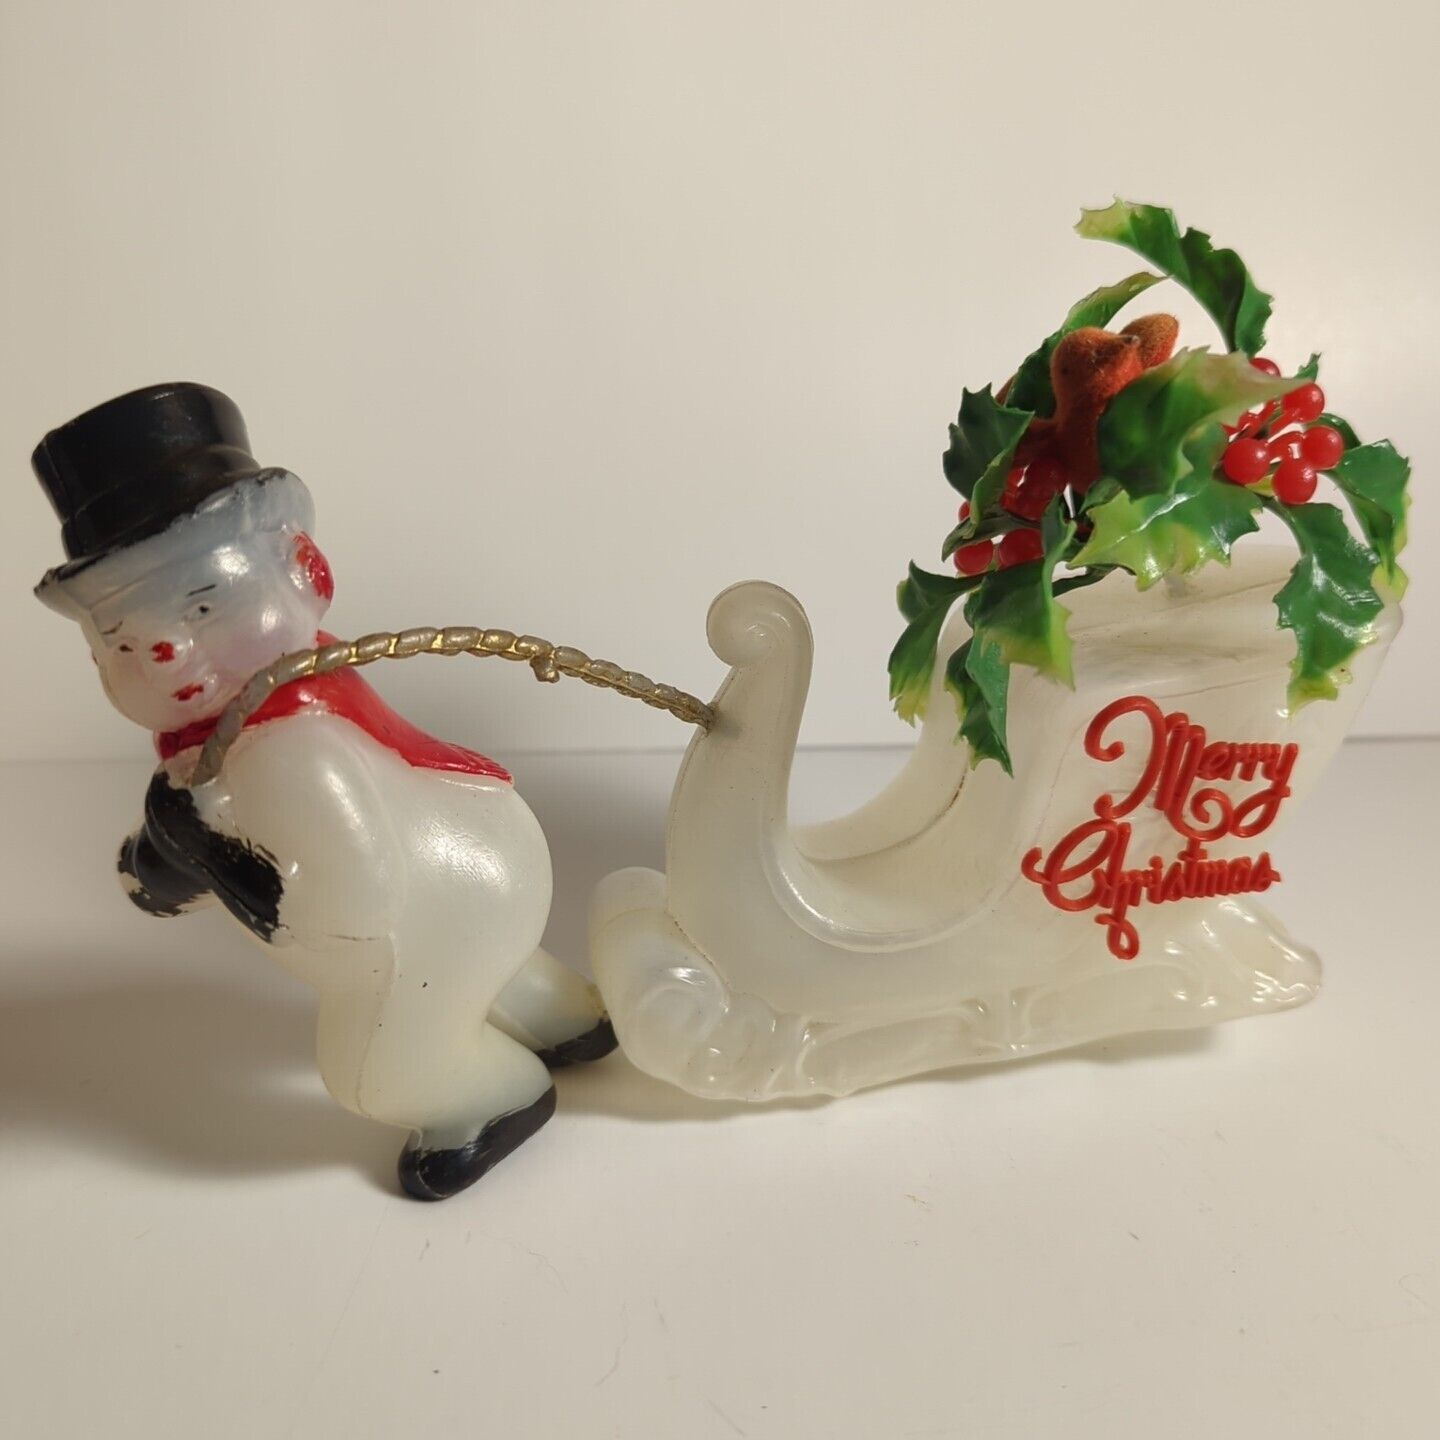 Vintage Merry Christmas Snowman Pulling Sleigh Soft Plastic Kitschy Decoration